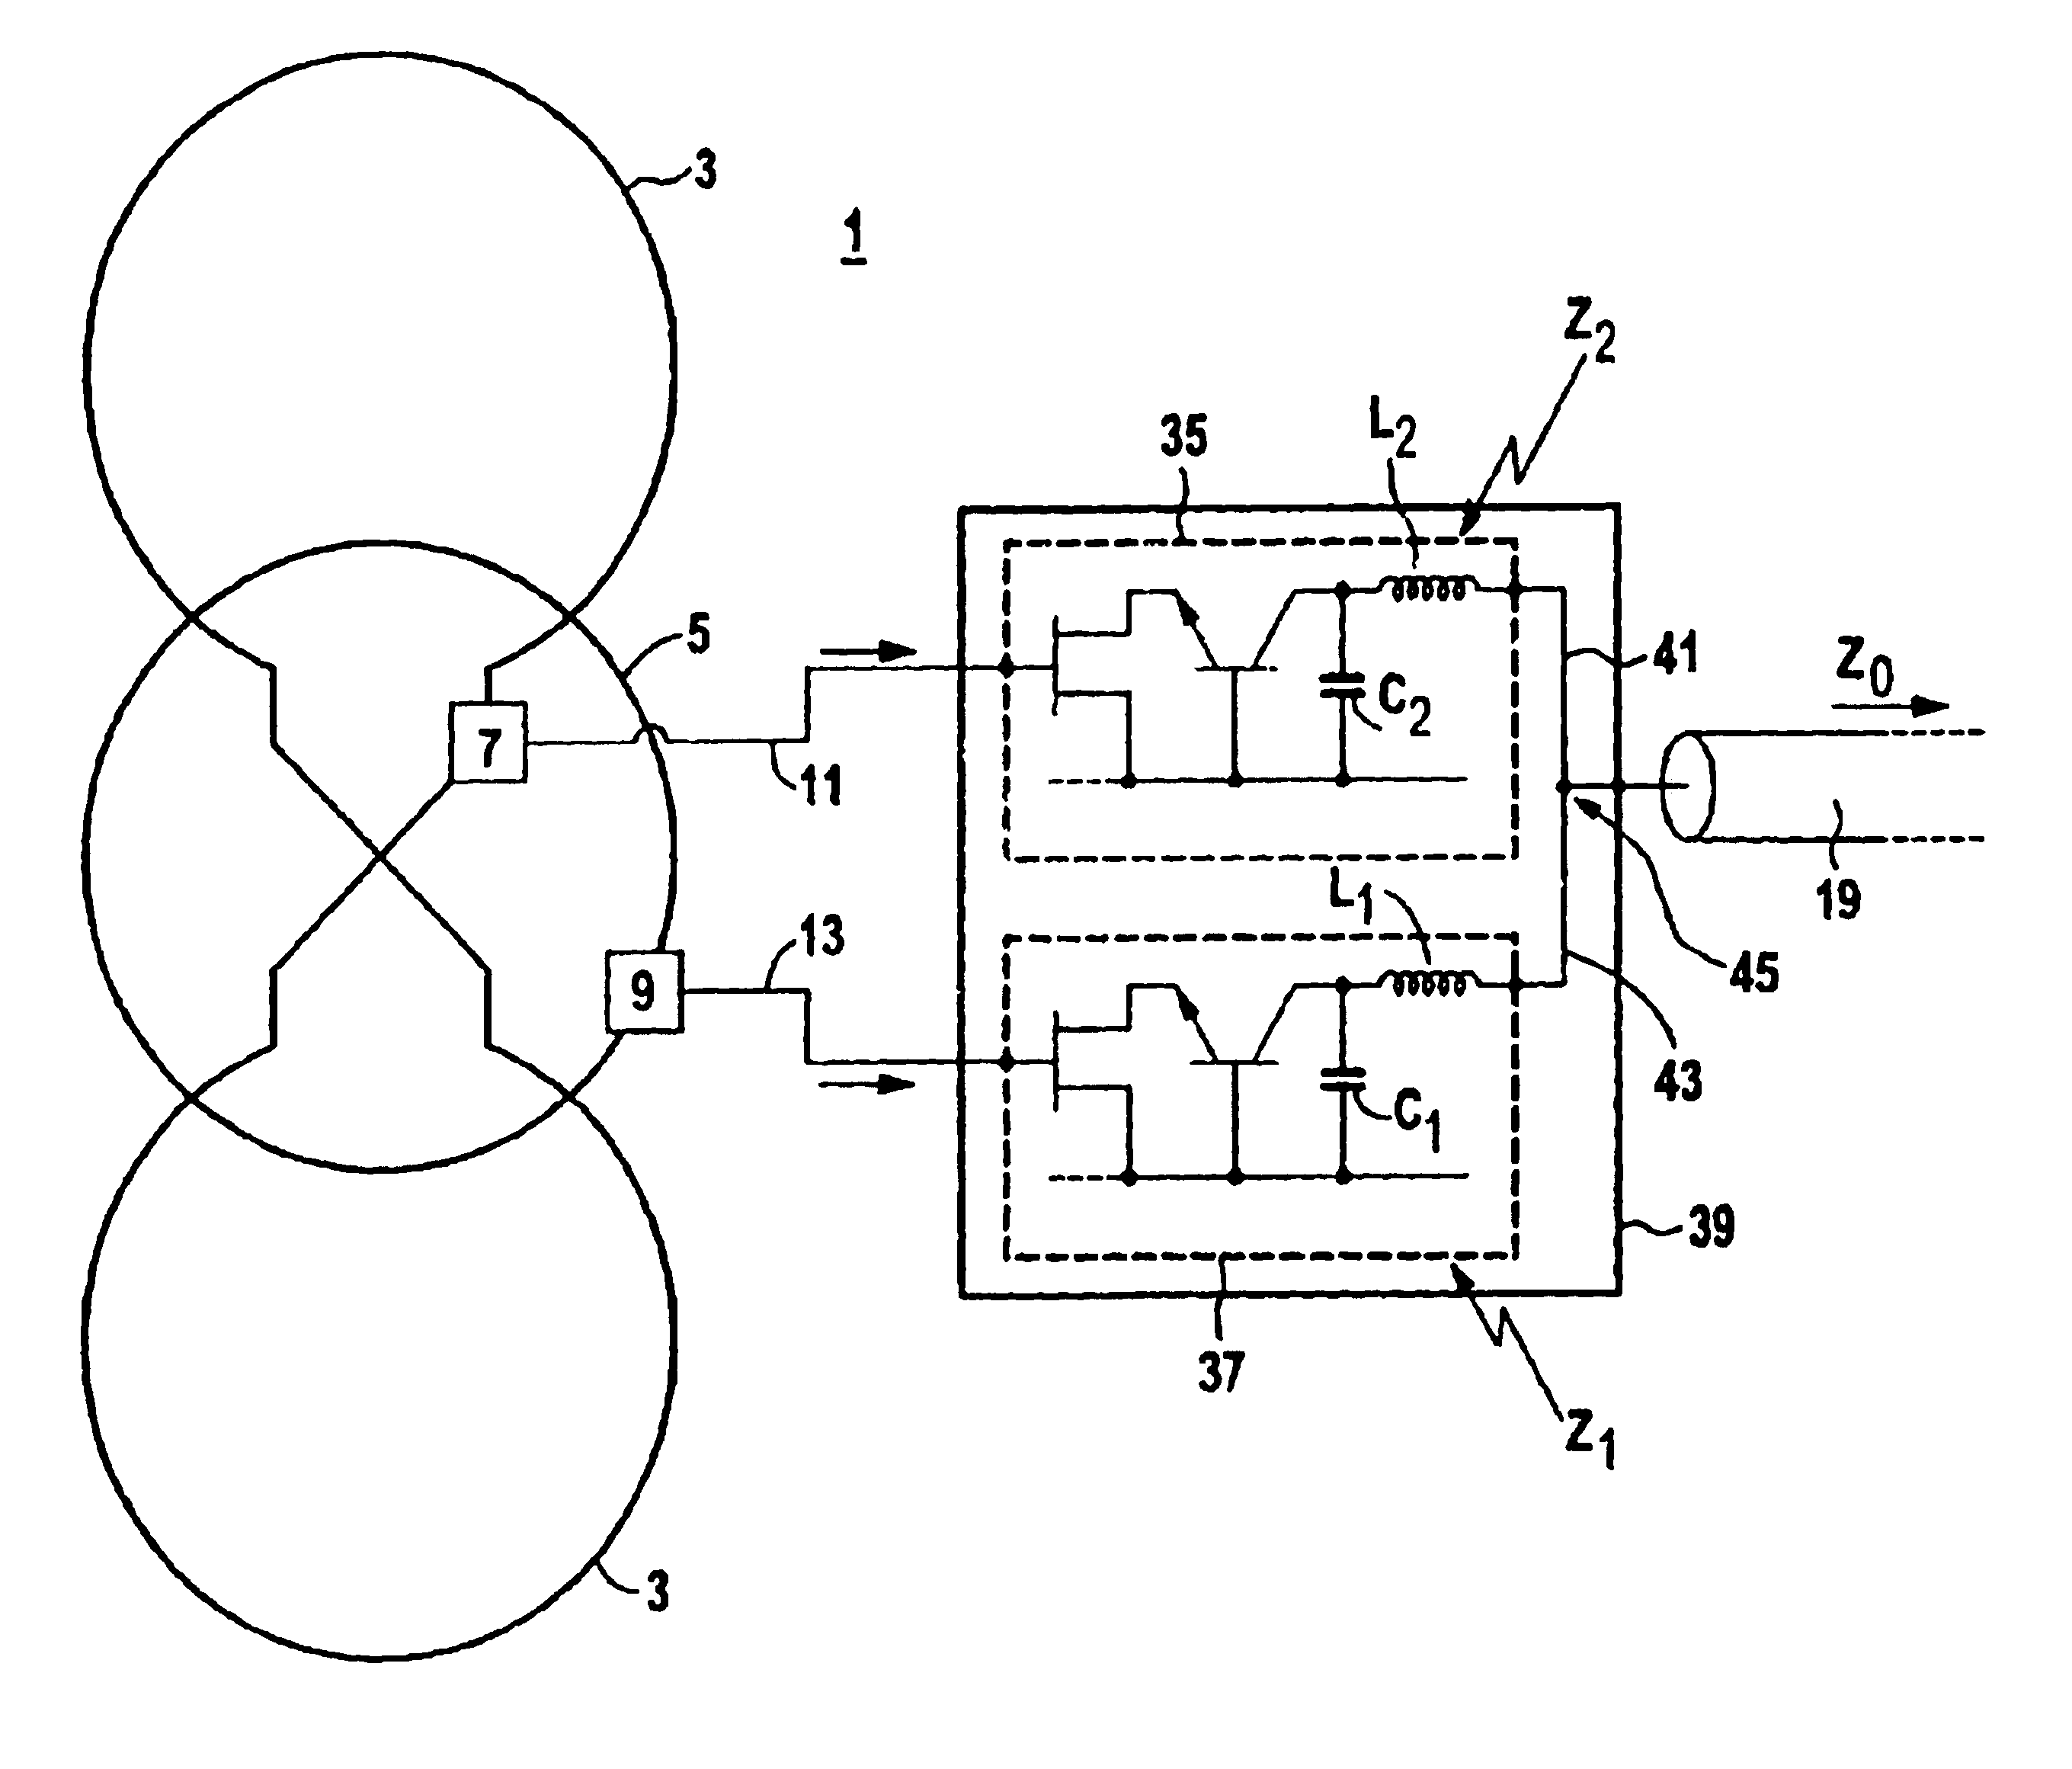 Reception device for a magnetic resonance tomography installation, having a phase shift-compensating amplifier